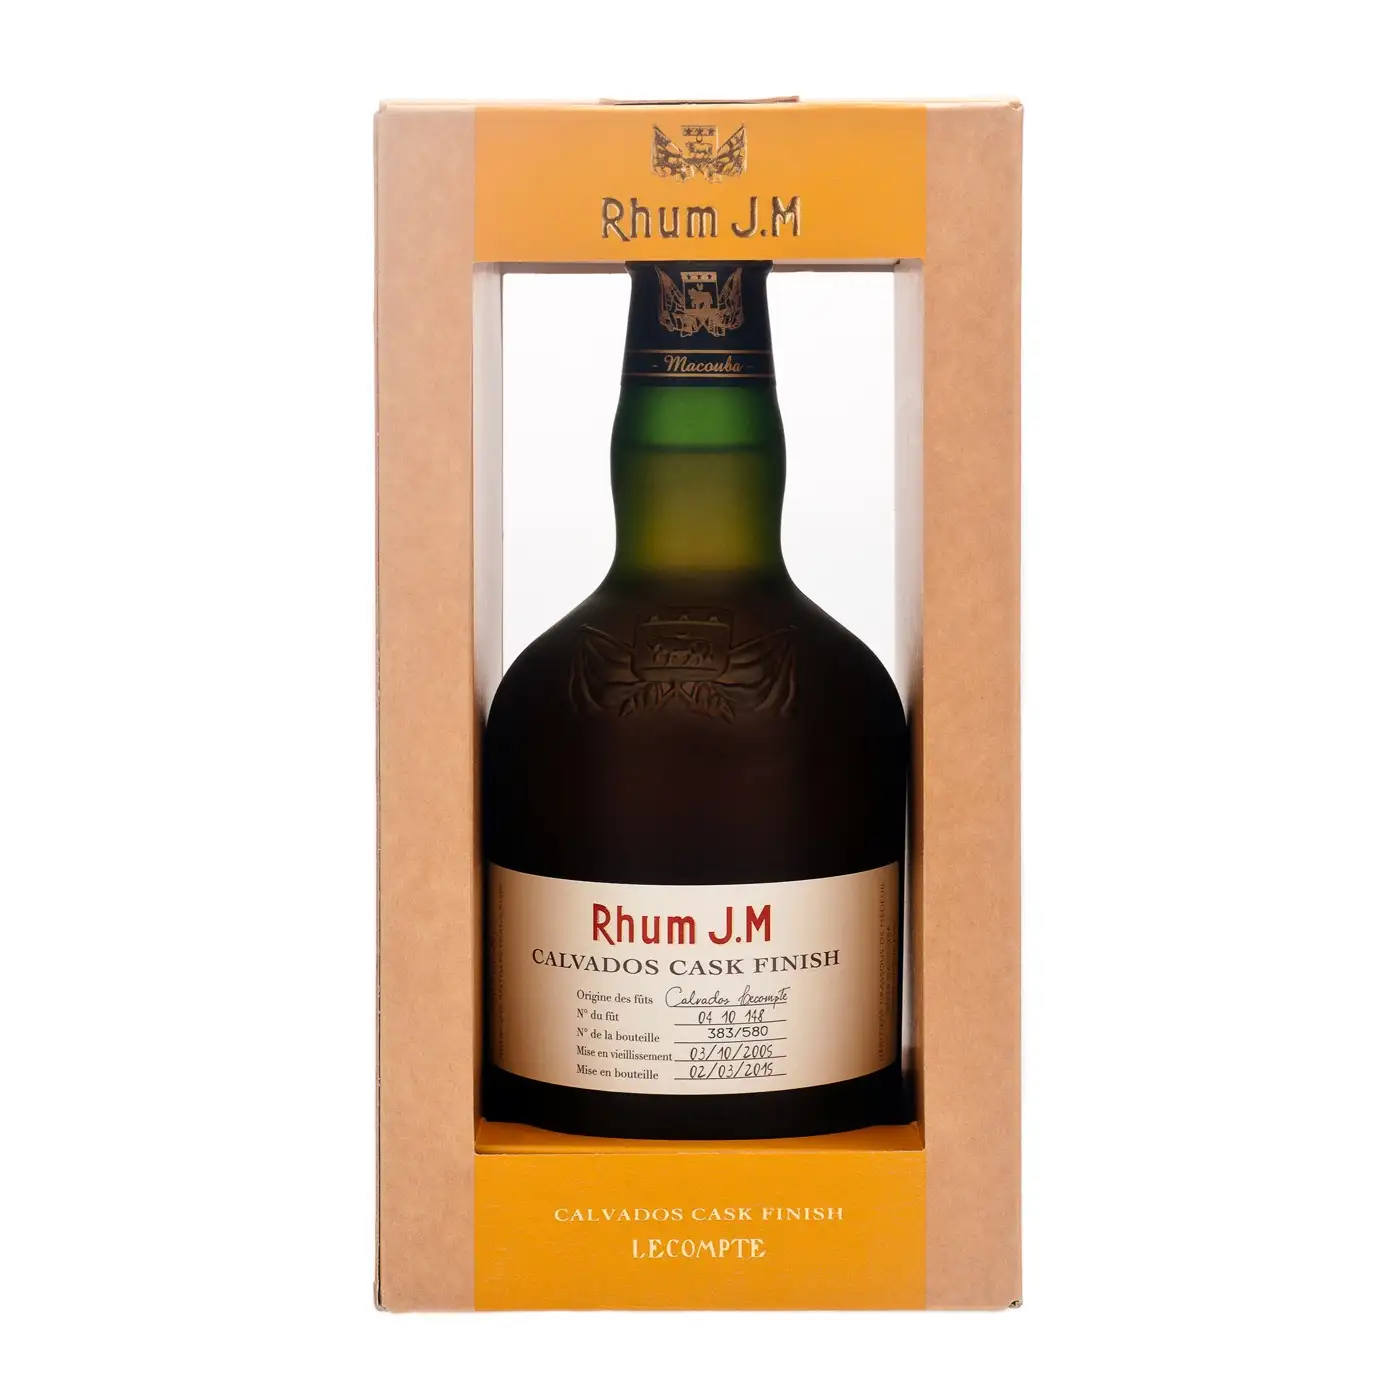 Image of the front of the bottle of the rum Série N°1 Calvados Cask Finish